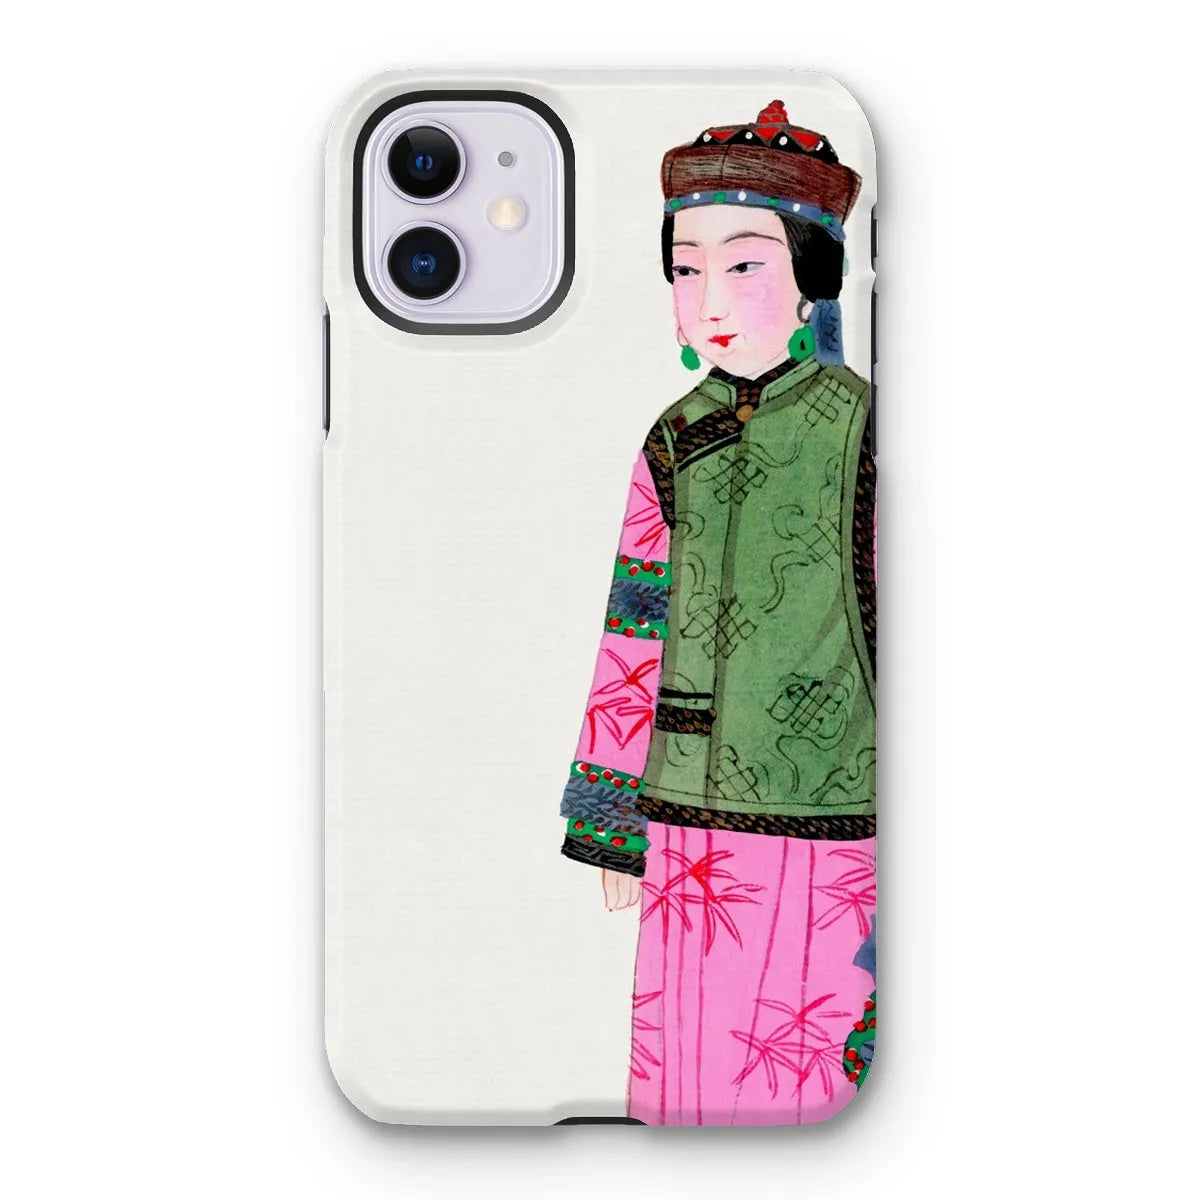 Noblewoman In Winter - Chinese Aesthetic Art Phone Case - Iphone 11 / Matte - Mobile Phone Cases - Aesthetic Art